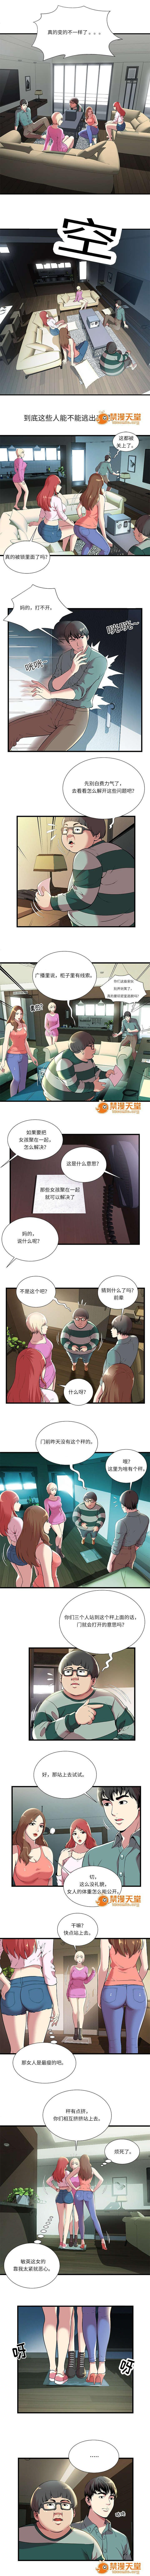 Ball Busting 脫逃遊戲 1-37 Chat - Page 4